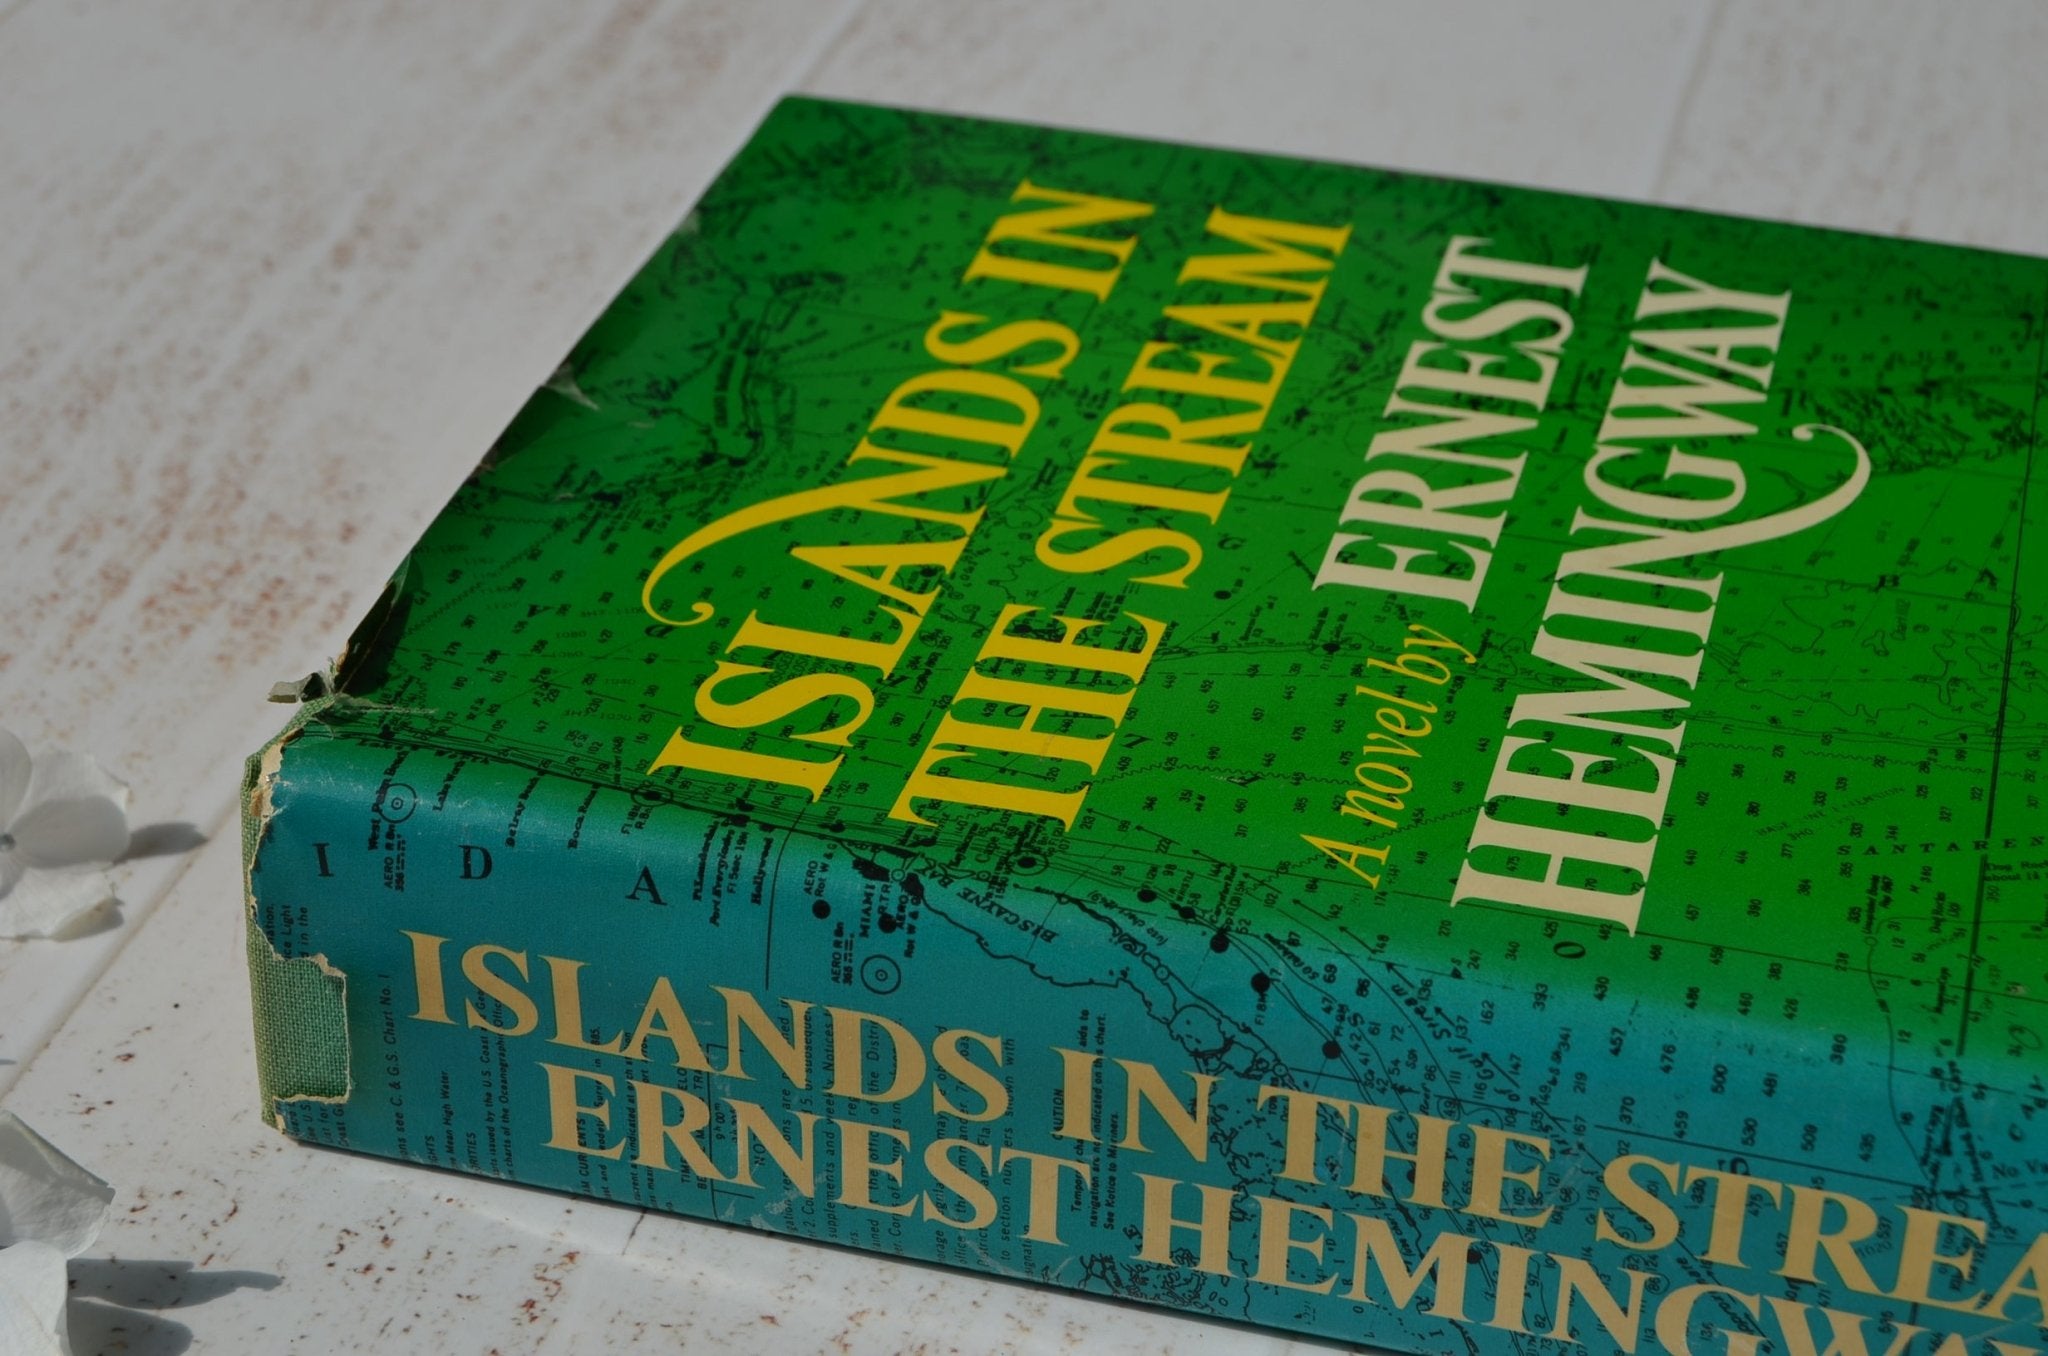 Second Printing – Islands in the Stream by Ernest Hemingway 1970 - Brookfield Books